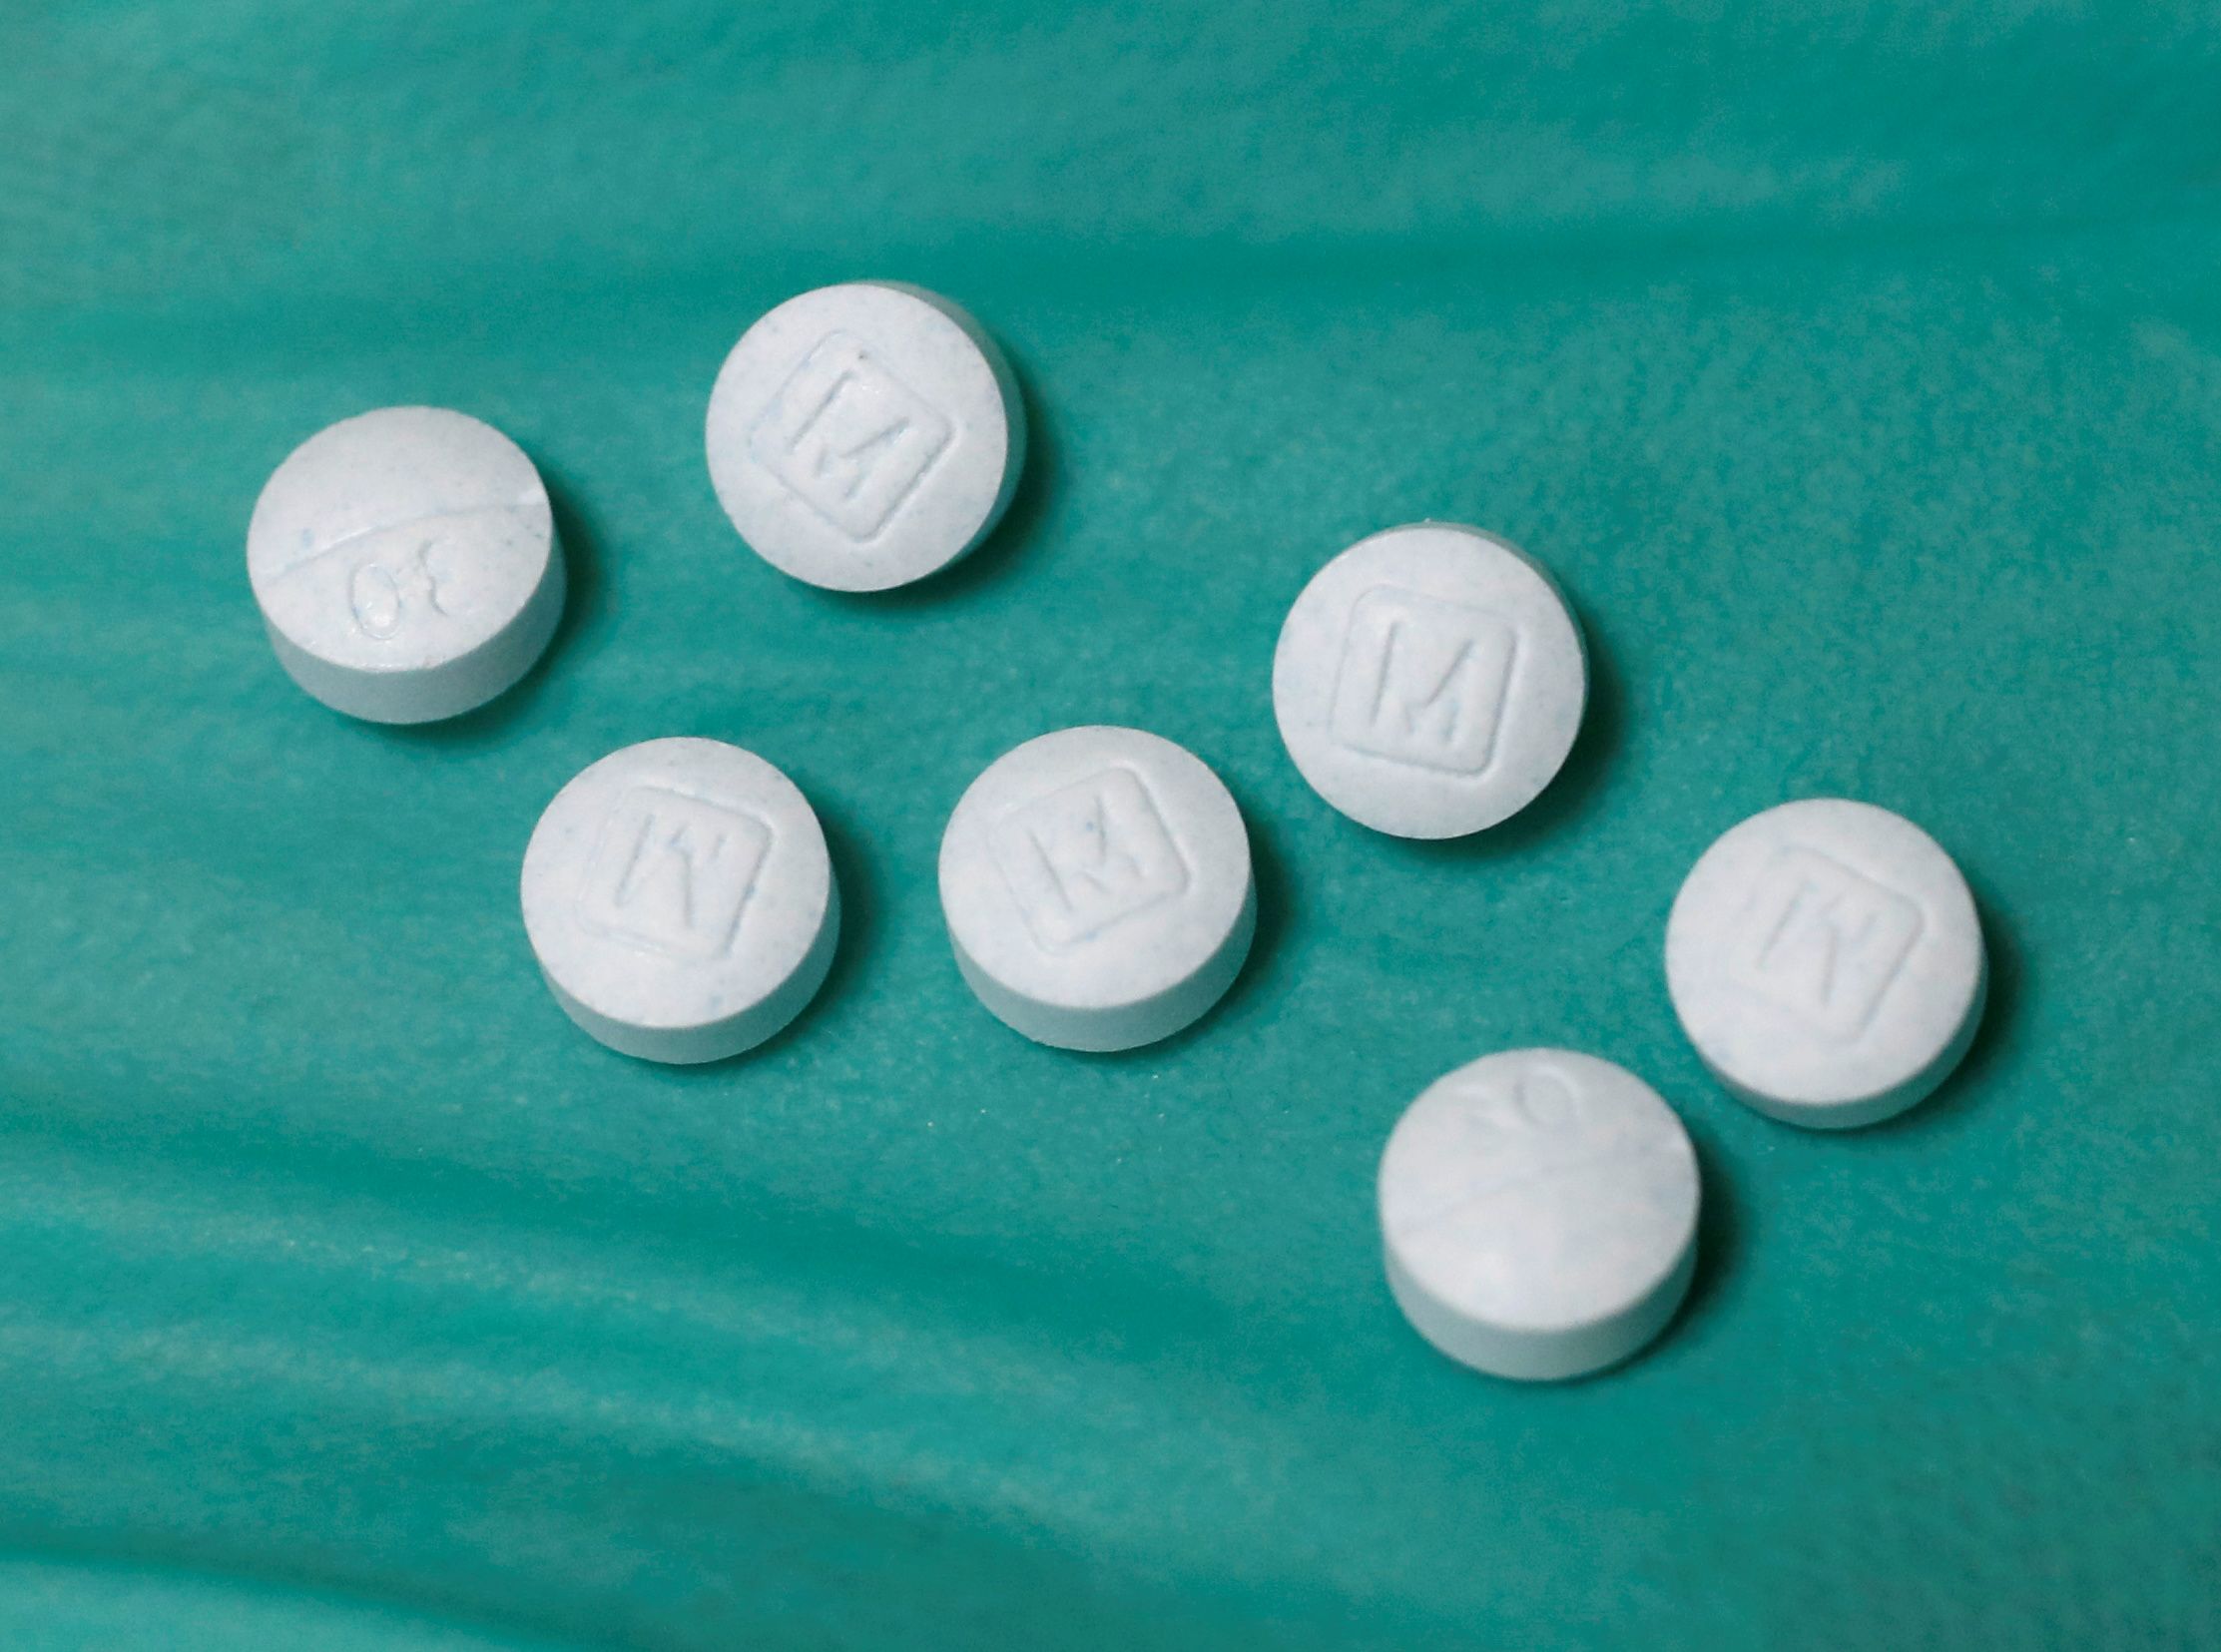 Oxycodone Risks Fake Pills Laced With Fentanyl 'Will Kill You